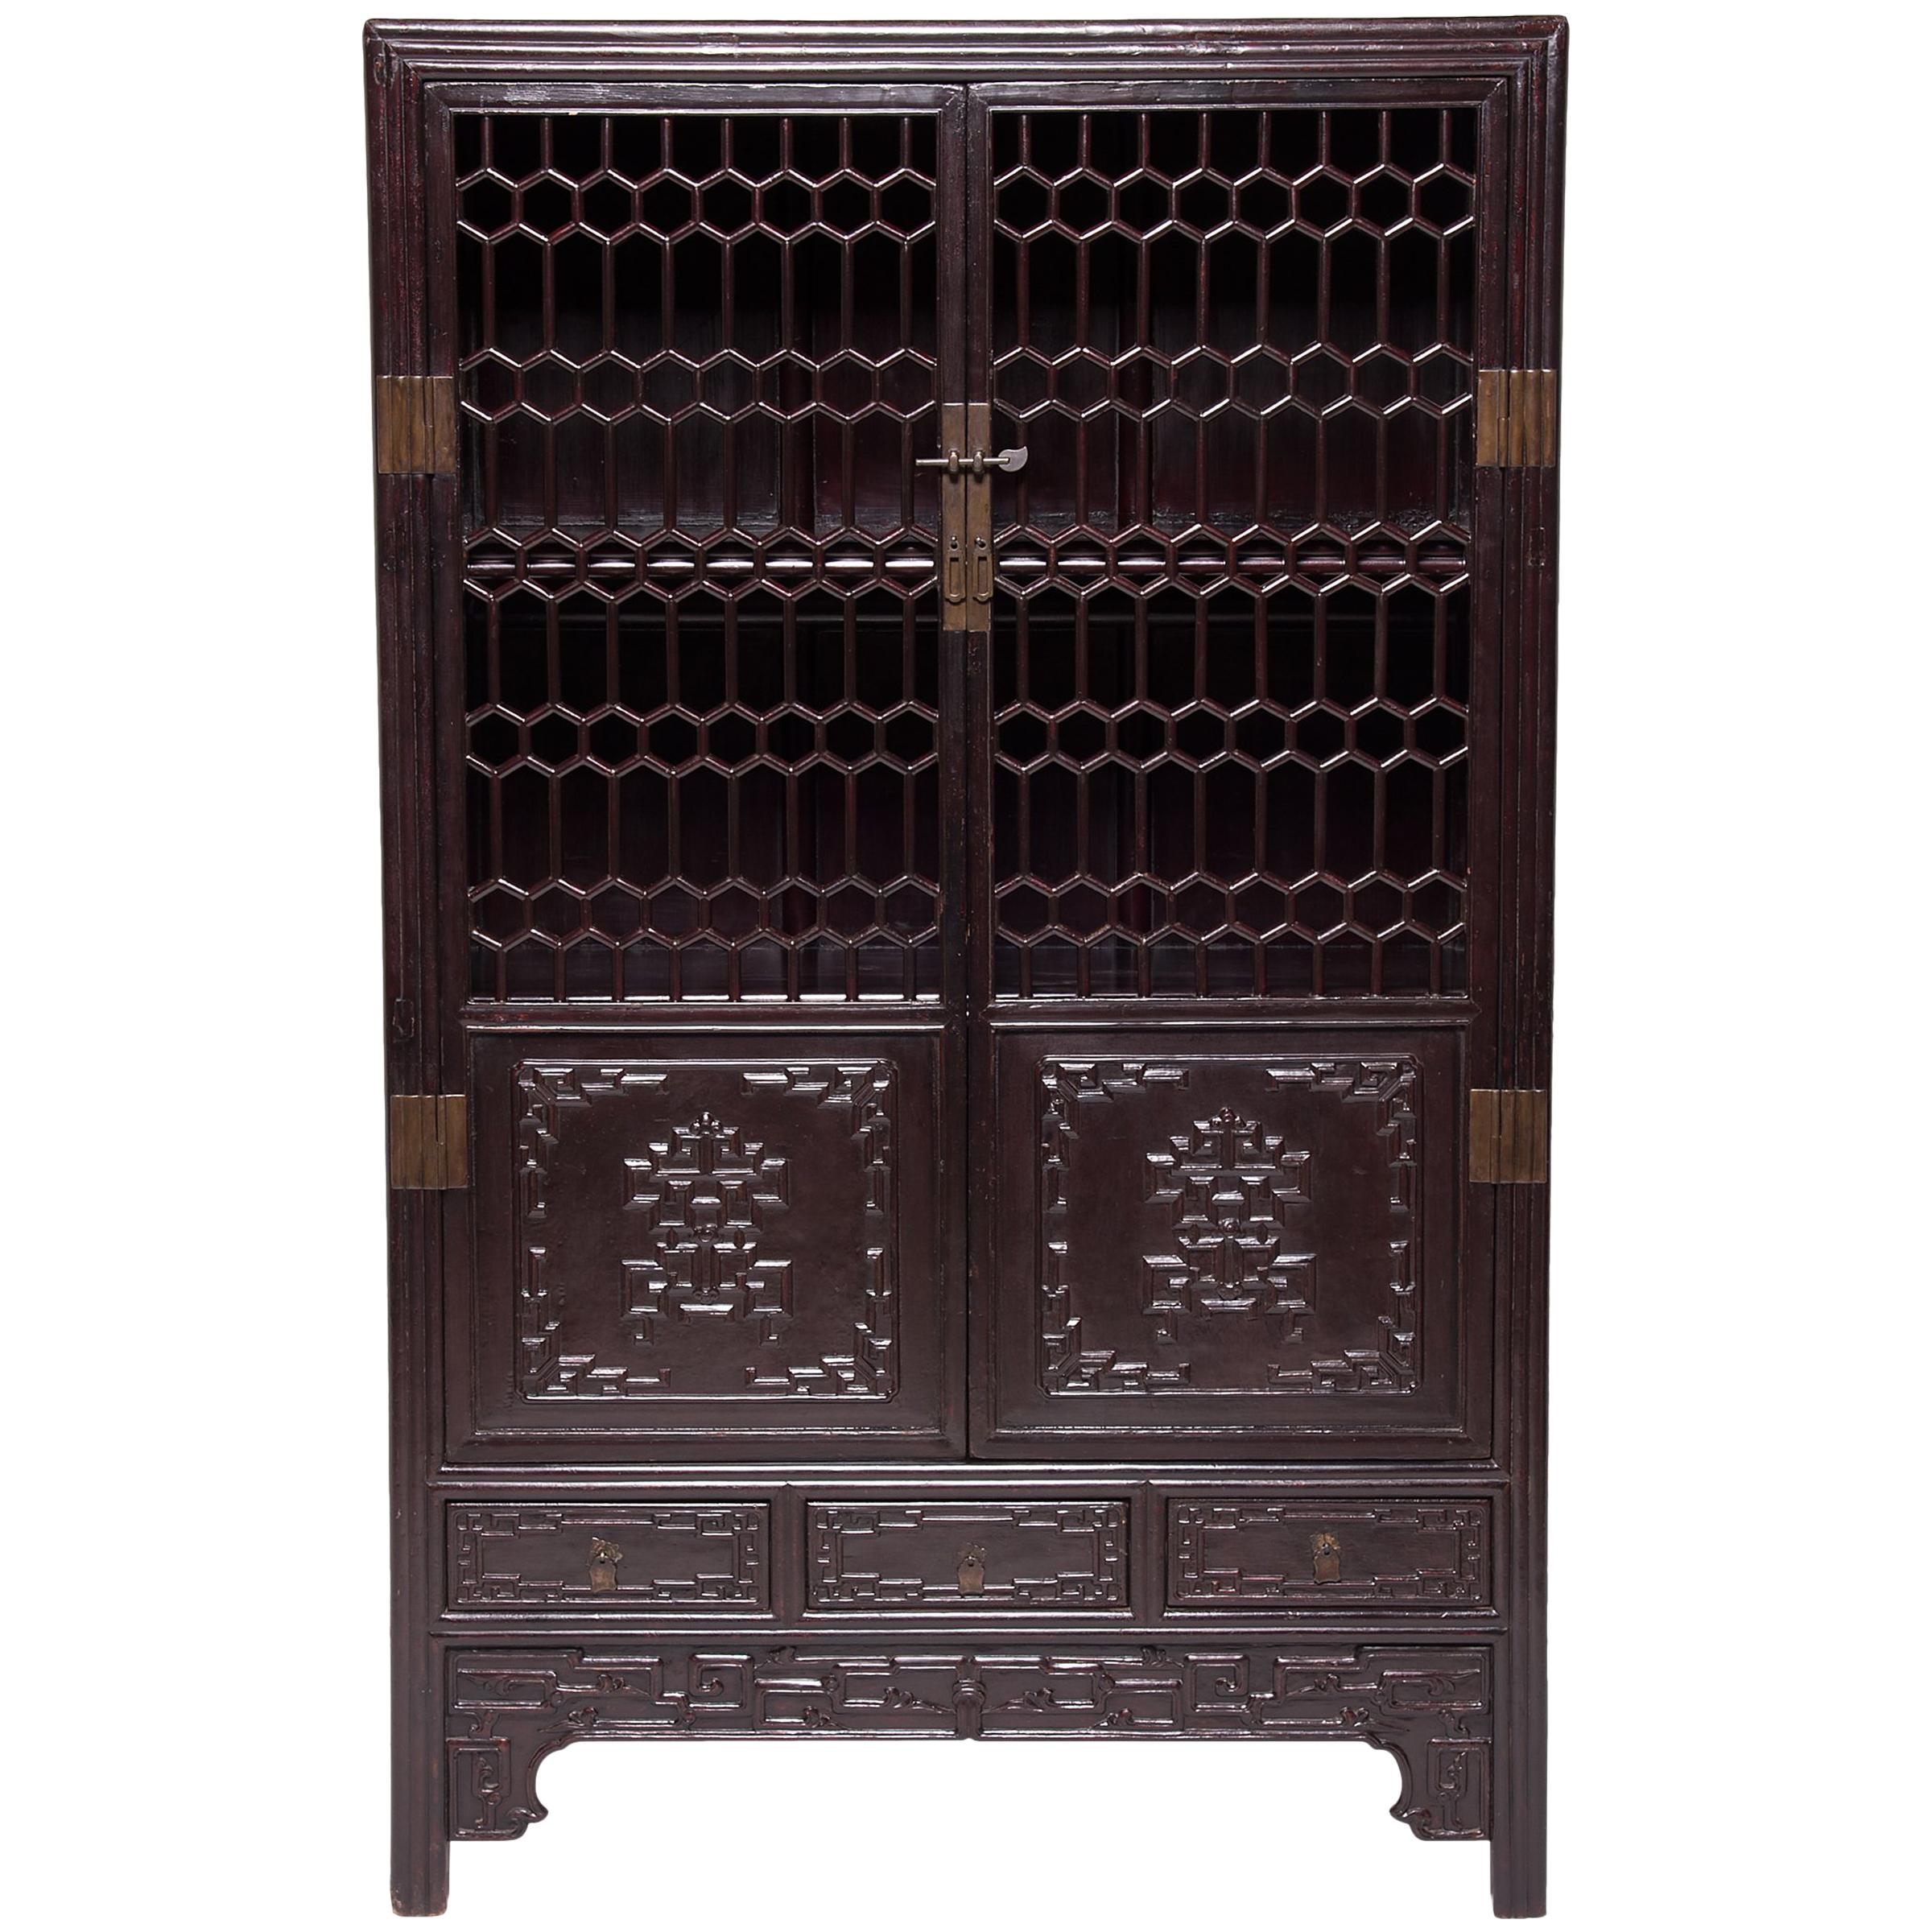 Chinese Honeycomb Lattice Display Cabinet, c. 1800 For Sale